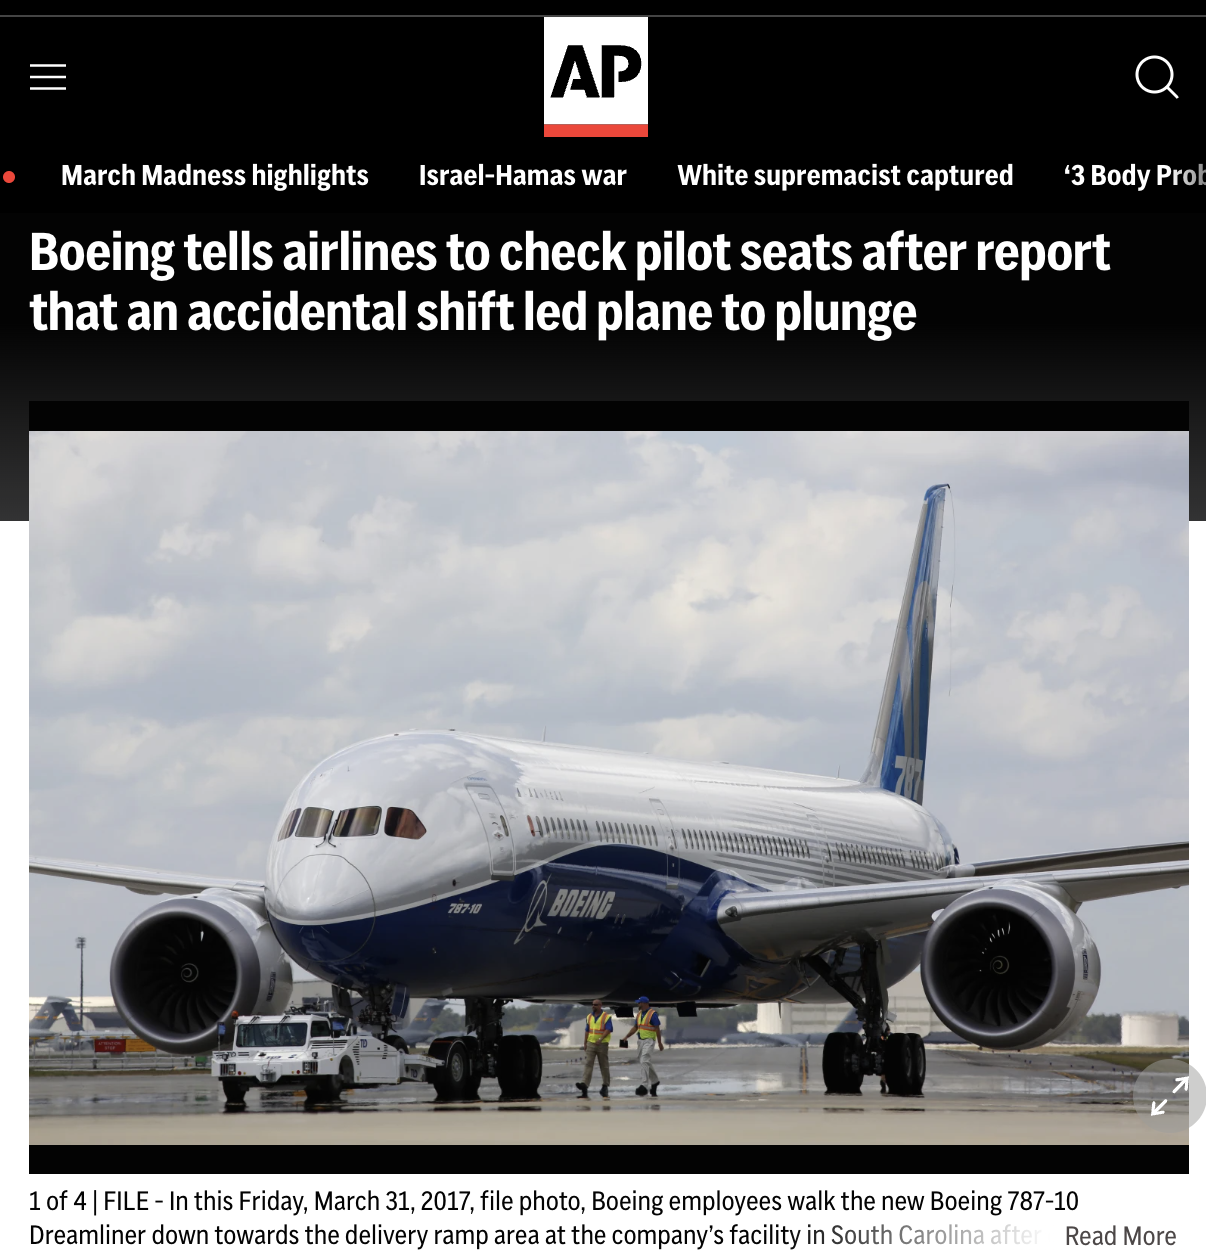 dreamliner 737 - Iii Ap March Madness highlights IsraelHamas war White supremacist captured 3 Body Prob Boeing tells airlines to check pilot seats after report that an accidental shift led plane to plunge 1 of 4 | File In this Friday, , file photo, Boeing